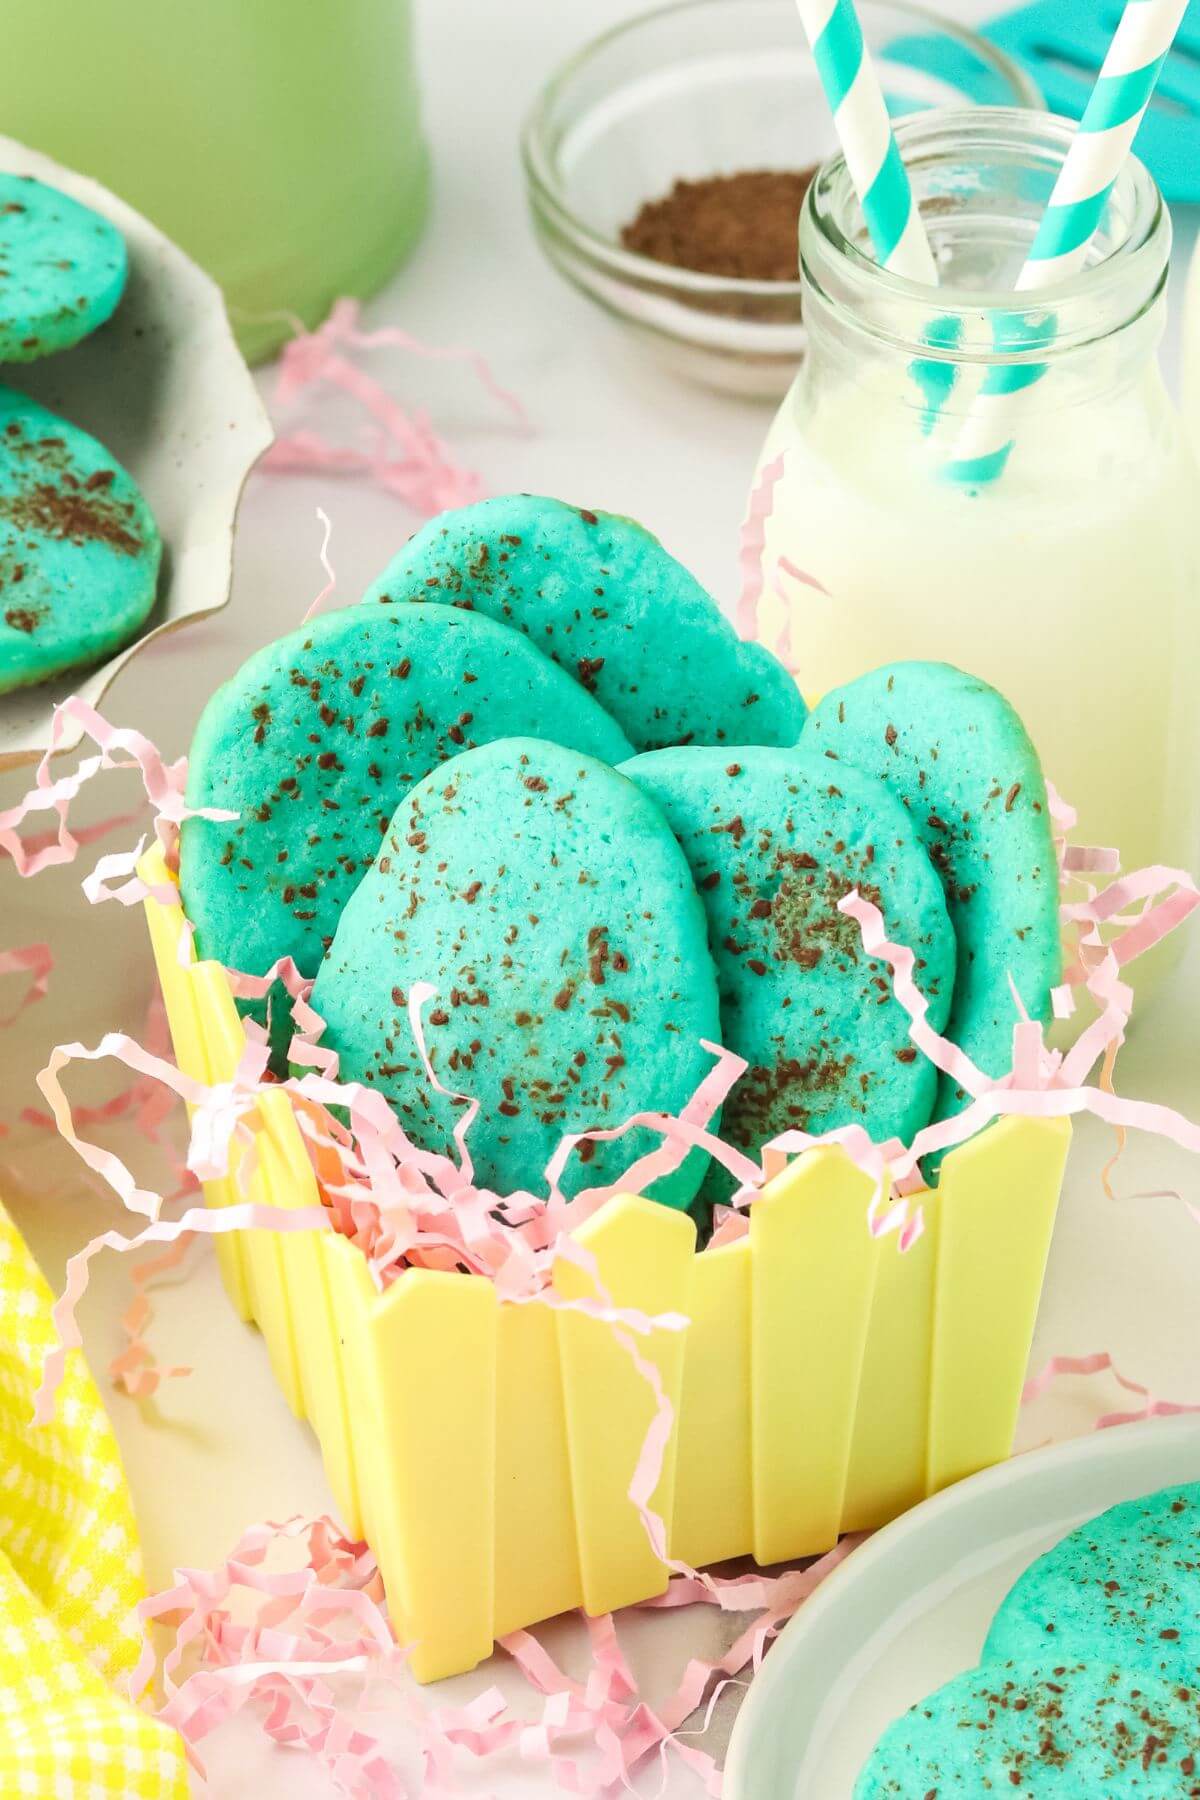 Robins egg slice and bake sugar cookies in Easter basket with pink grass shreds.